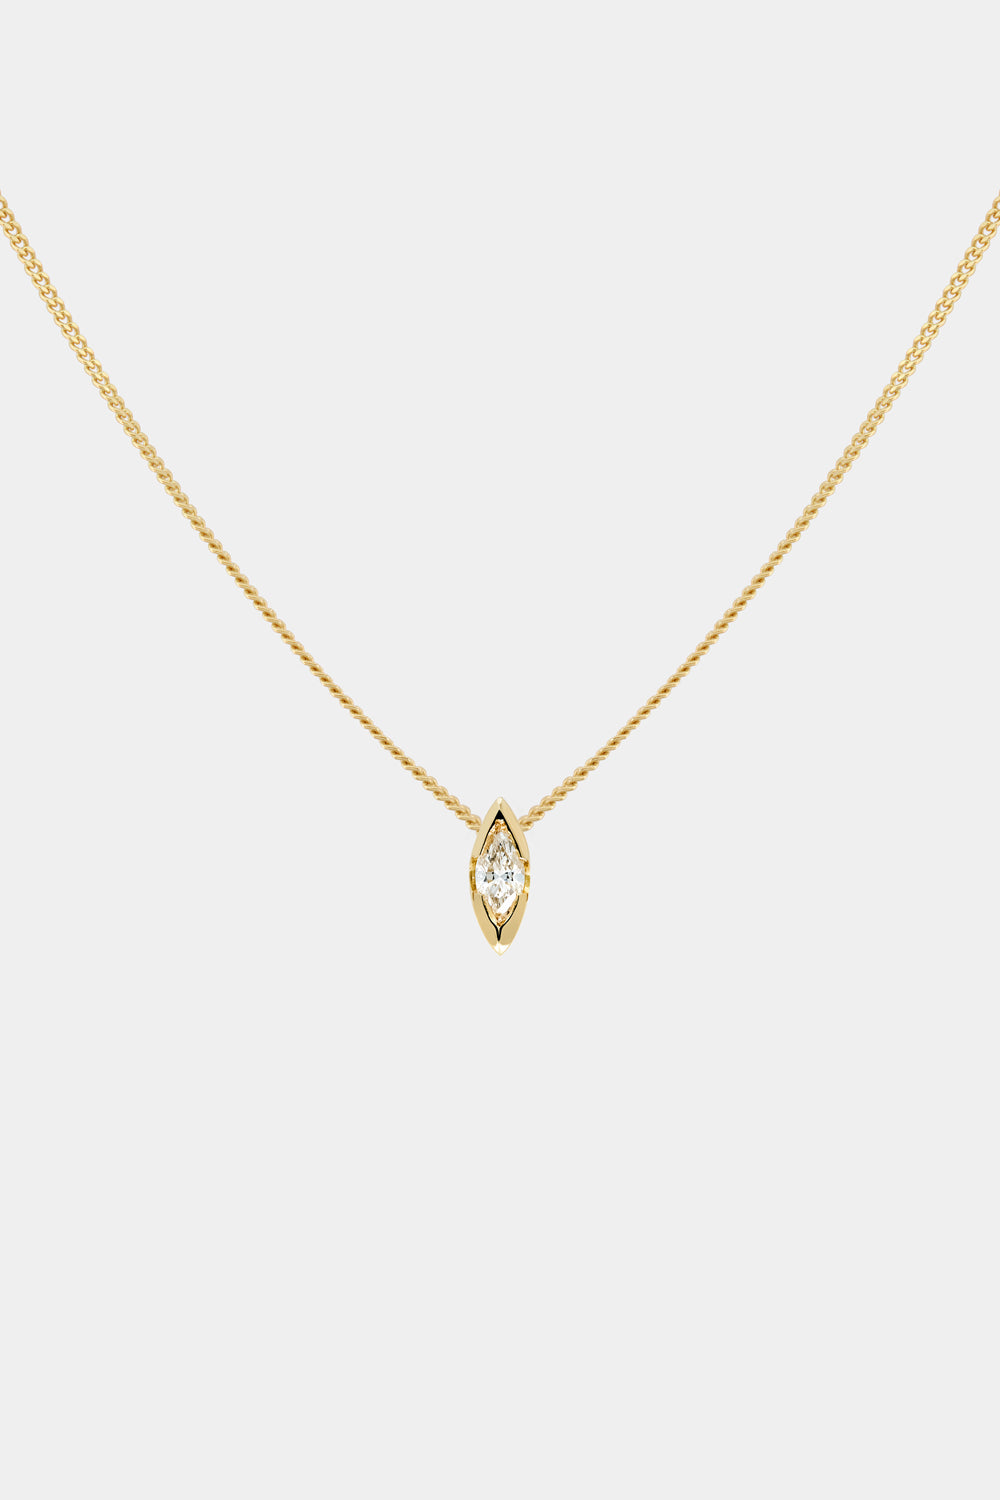 Mini Marquise Diamond Necklace | 9K Yellow or Rose Gold, More Options Available